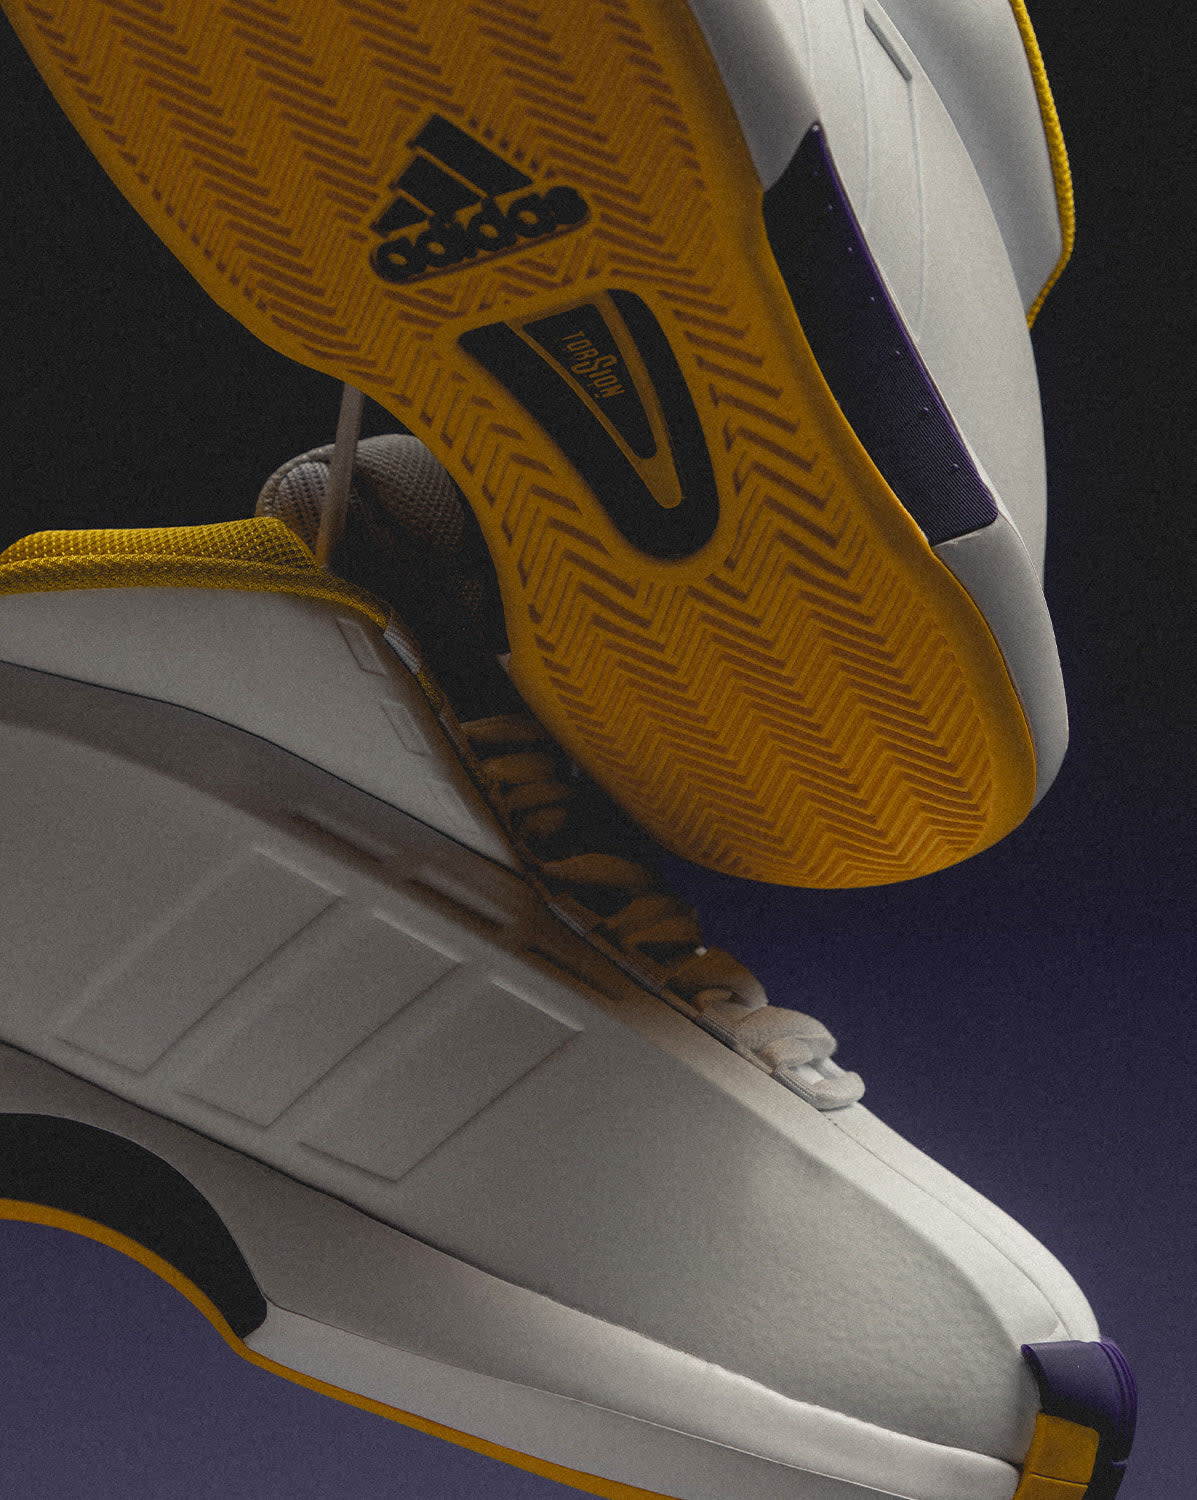 Lakers Home' Adidas Crazy 1 Is Releasing Again | Complex